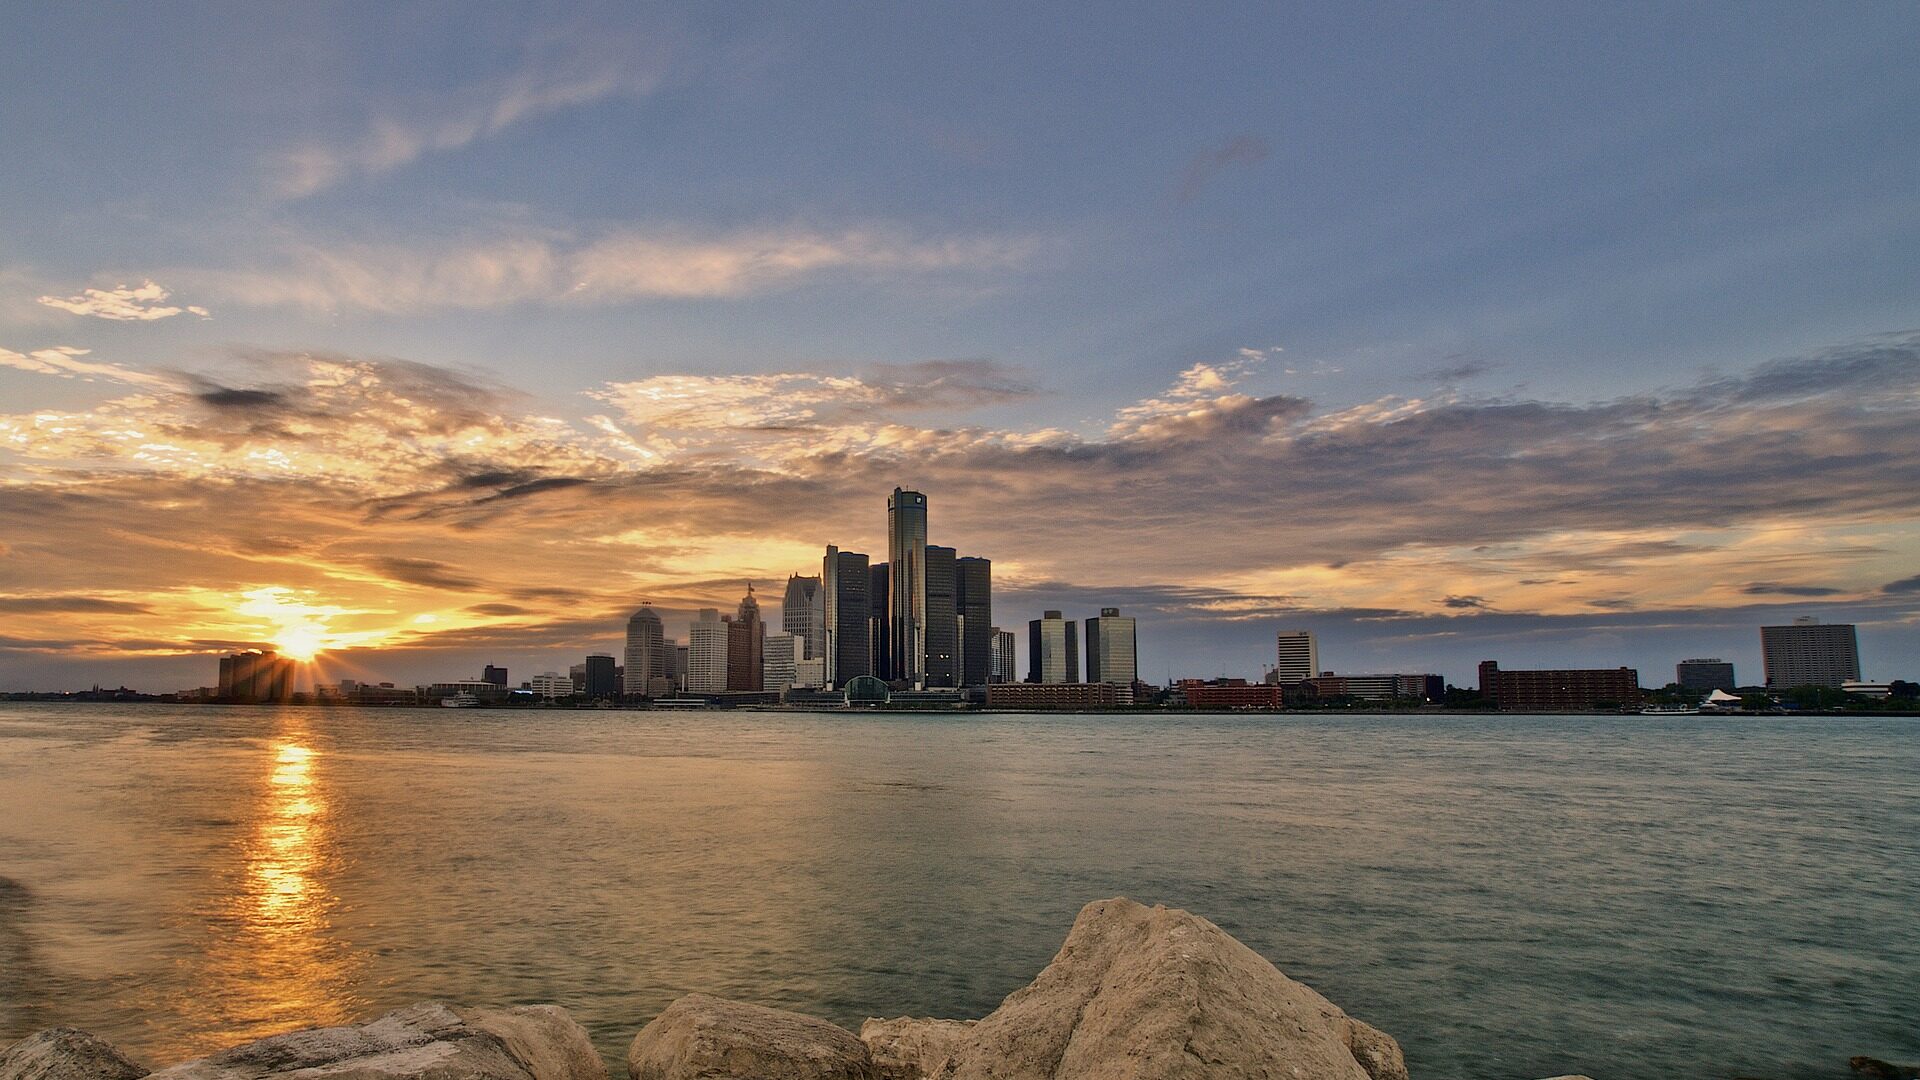 Skyline of Detroit from across the river. Image by Peter Mol from Pixabay.